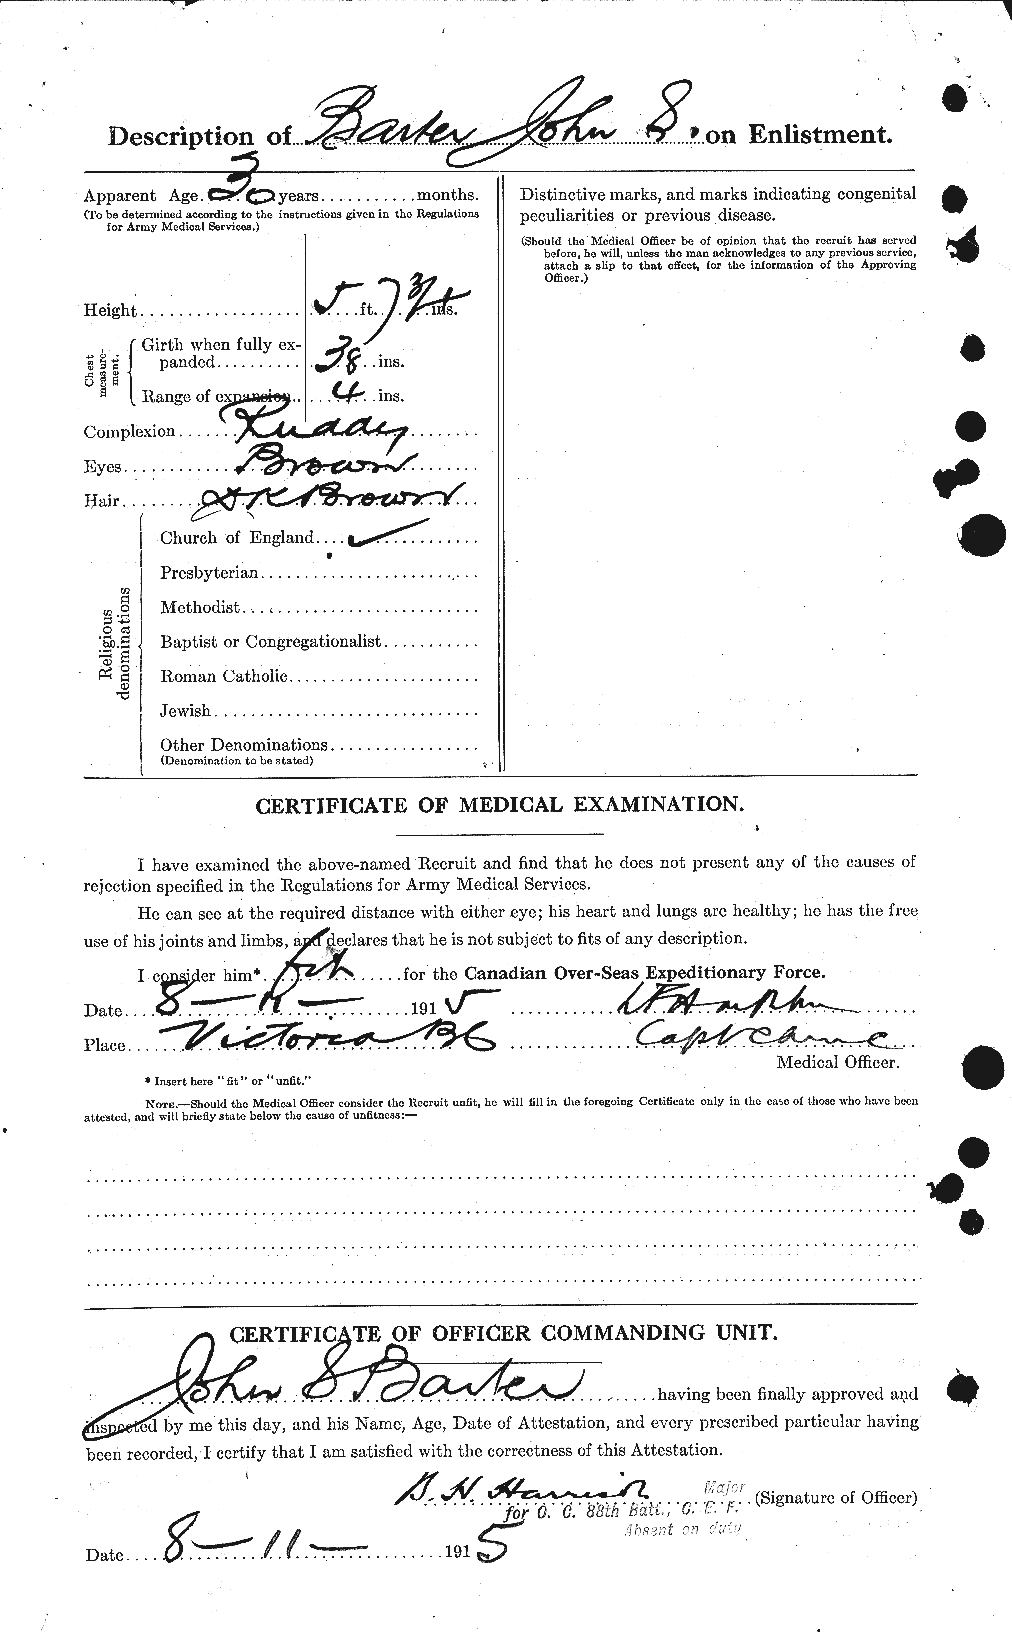 Personnel Records of the First World War - CEF 229045b